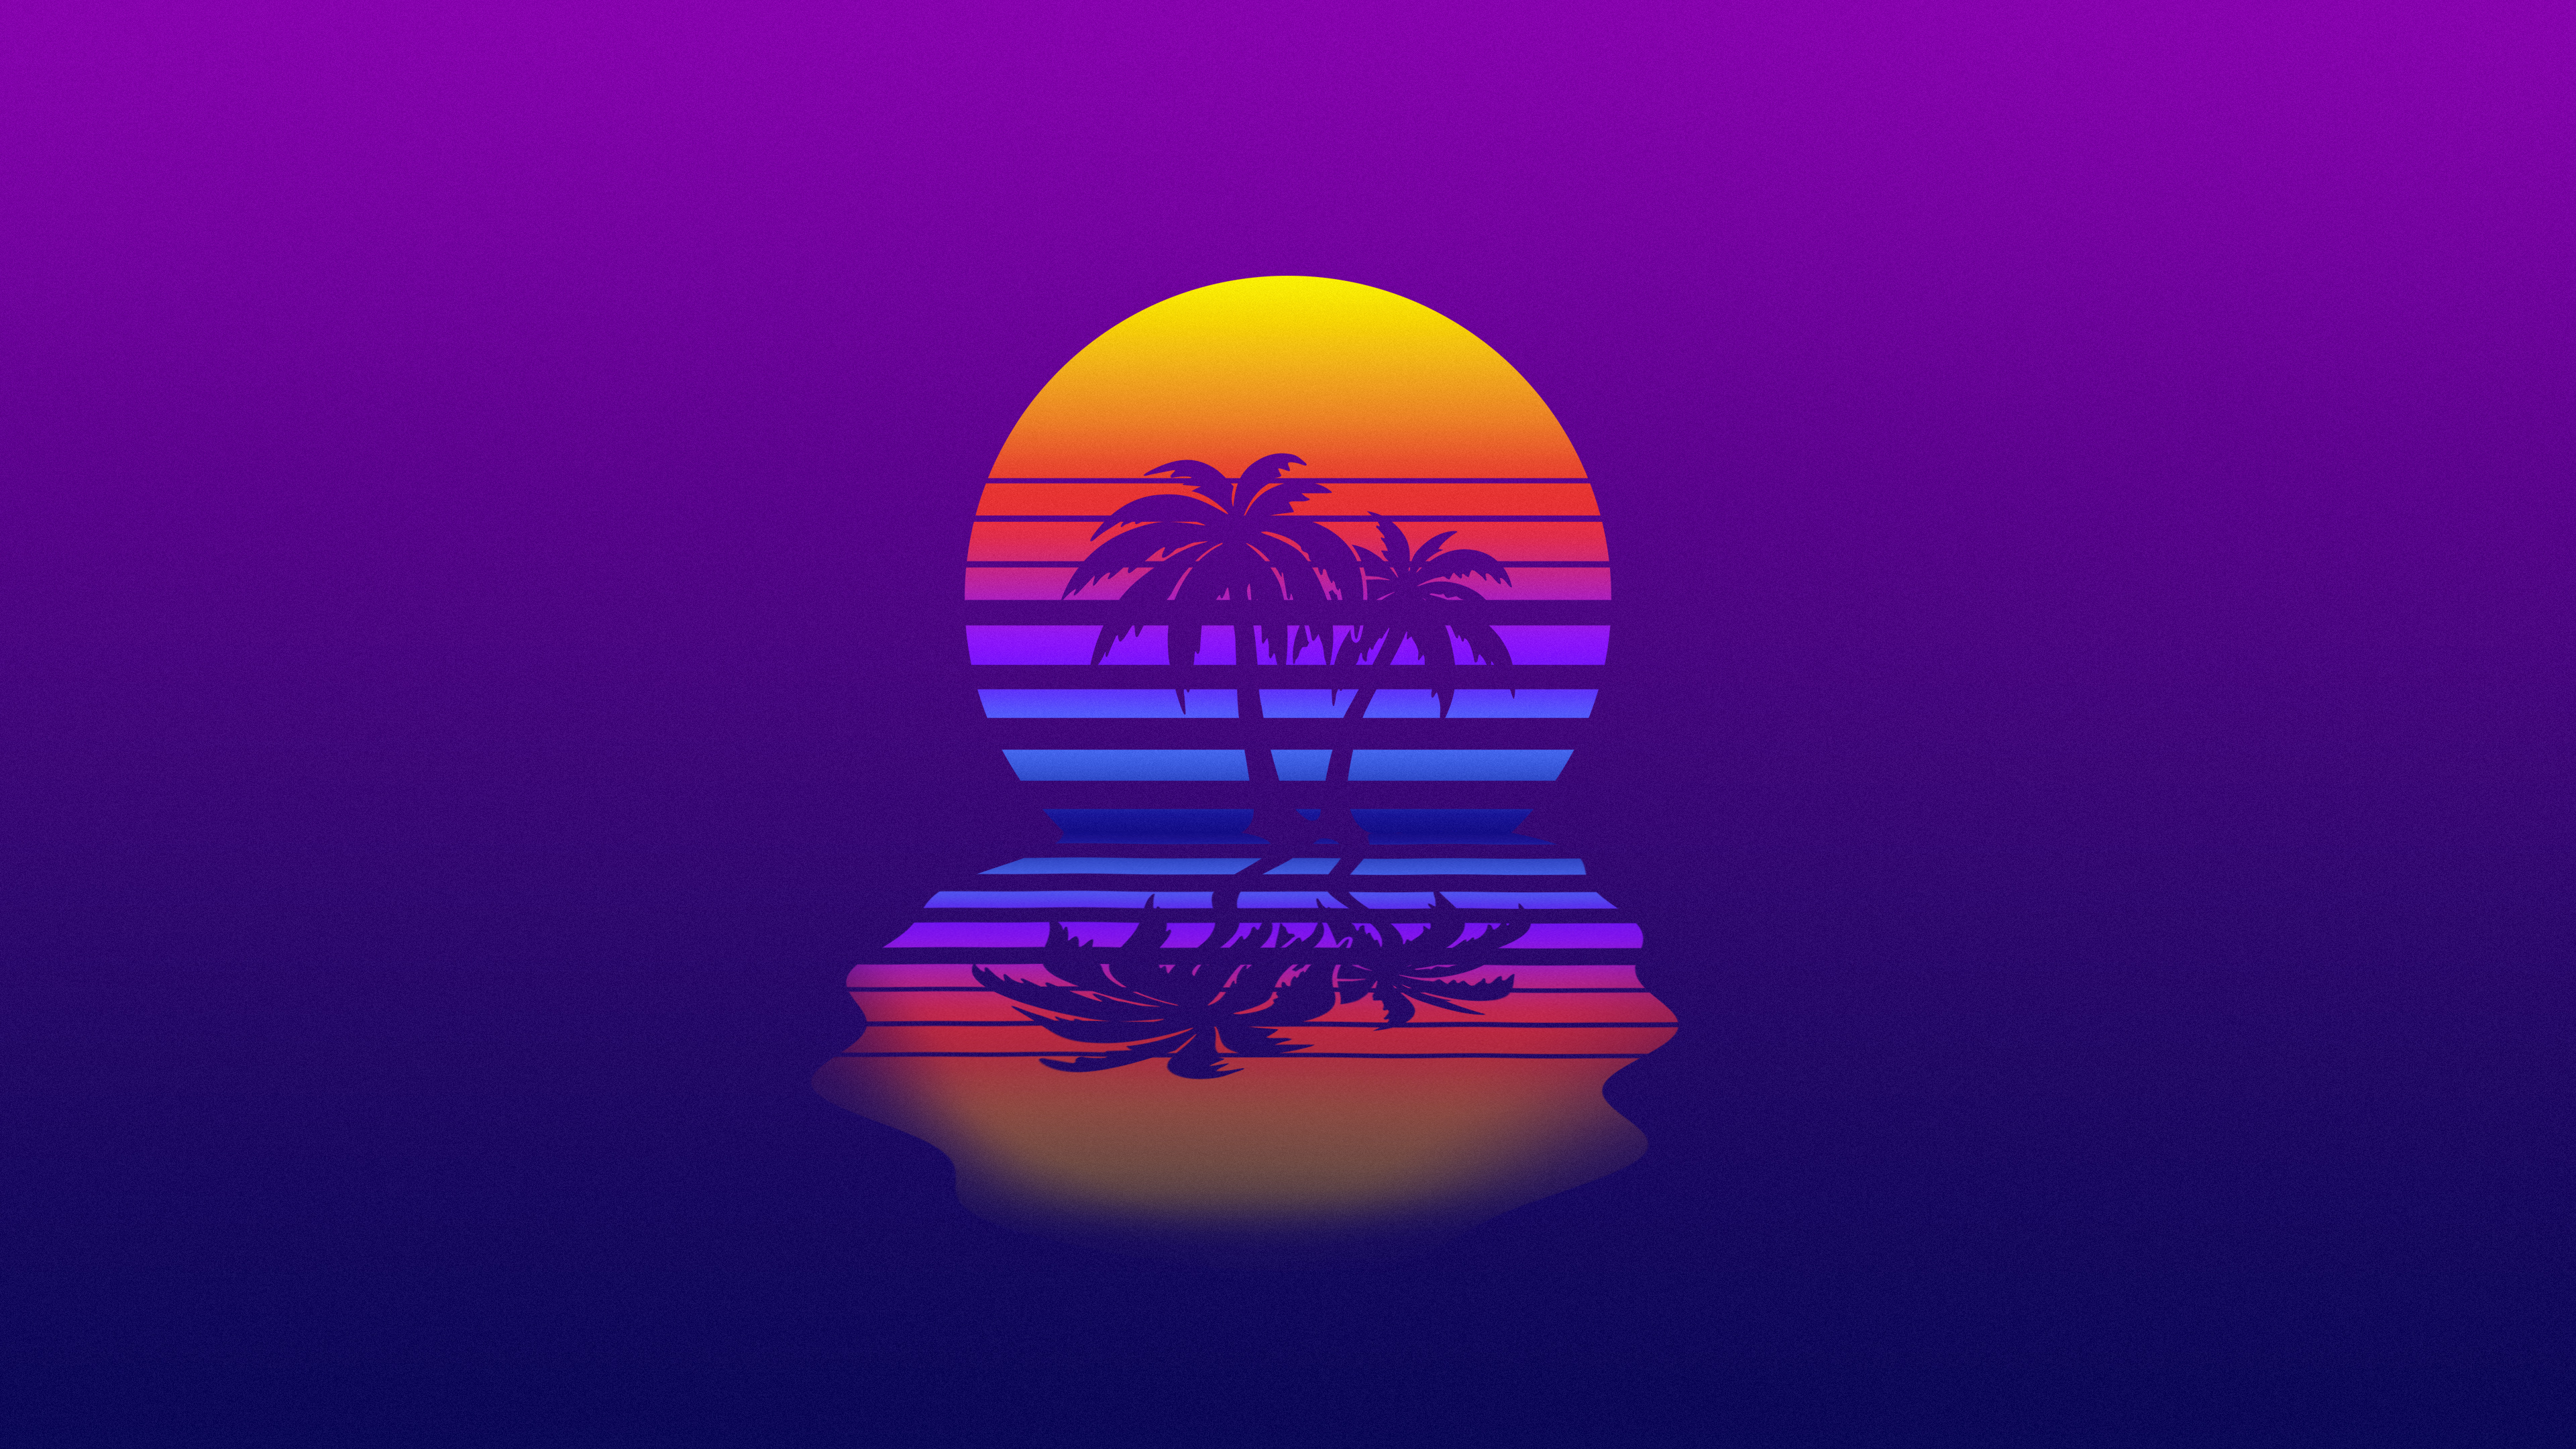 Palm Tree Synthwave 4k - Synthwave Wallpaper Phone - HD Wallpaper 